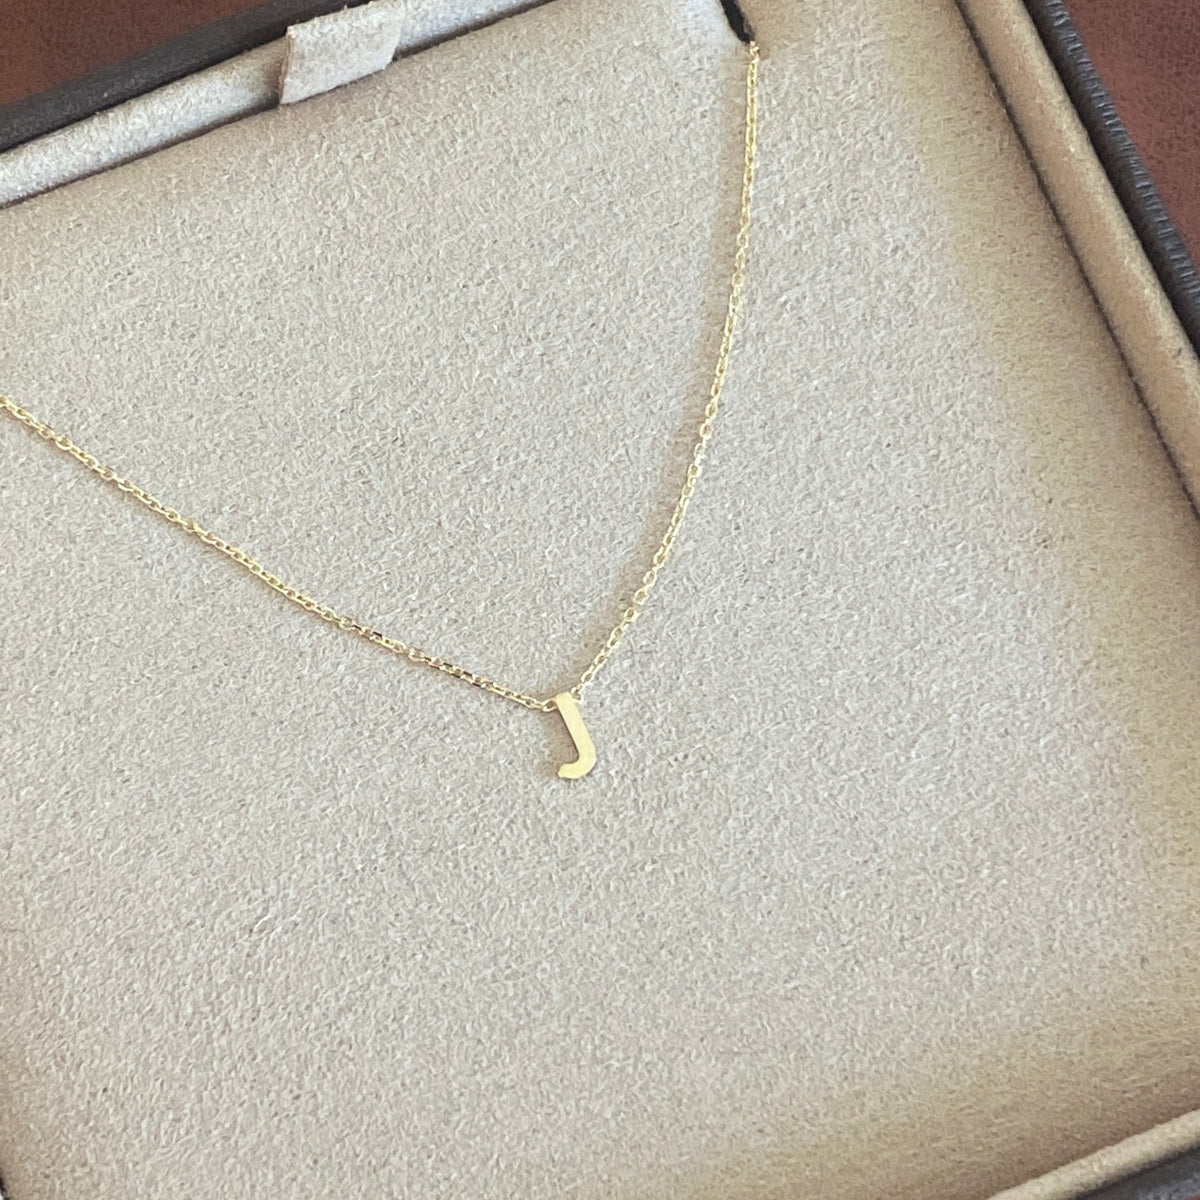 PETITE 'J' INITIAL NECKLACE | 9K SOLID GOLD